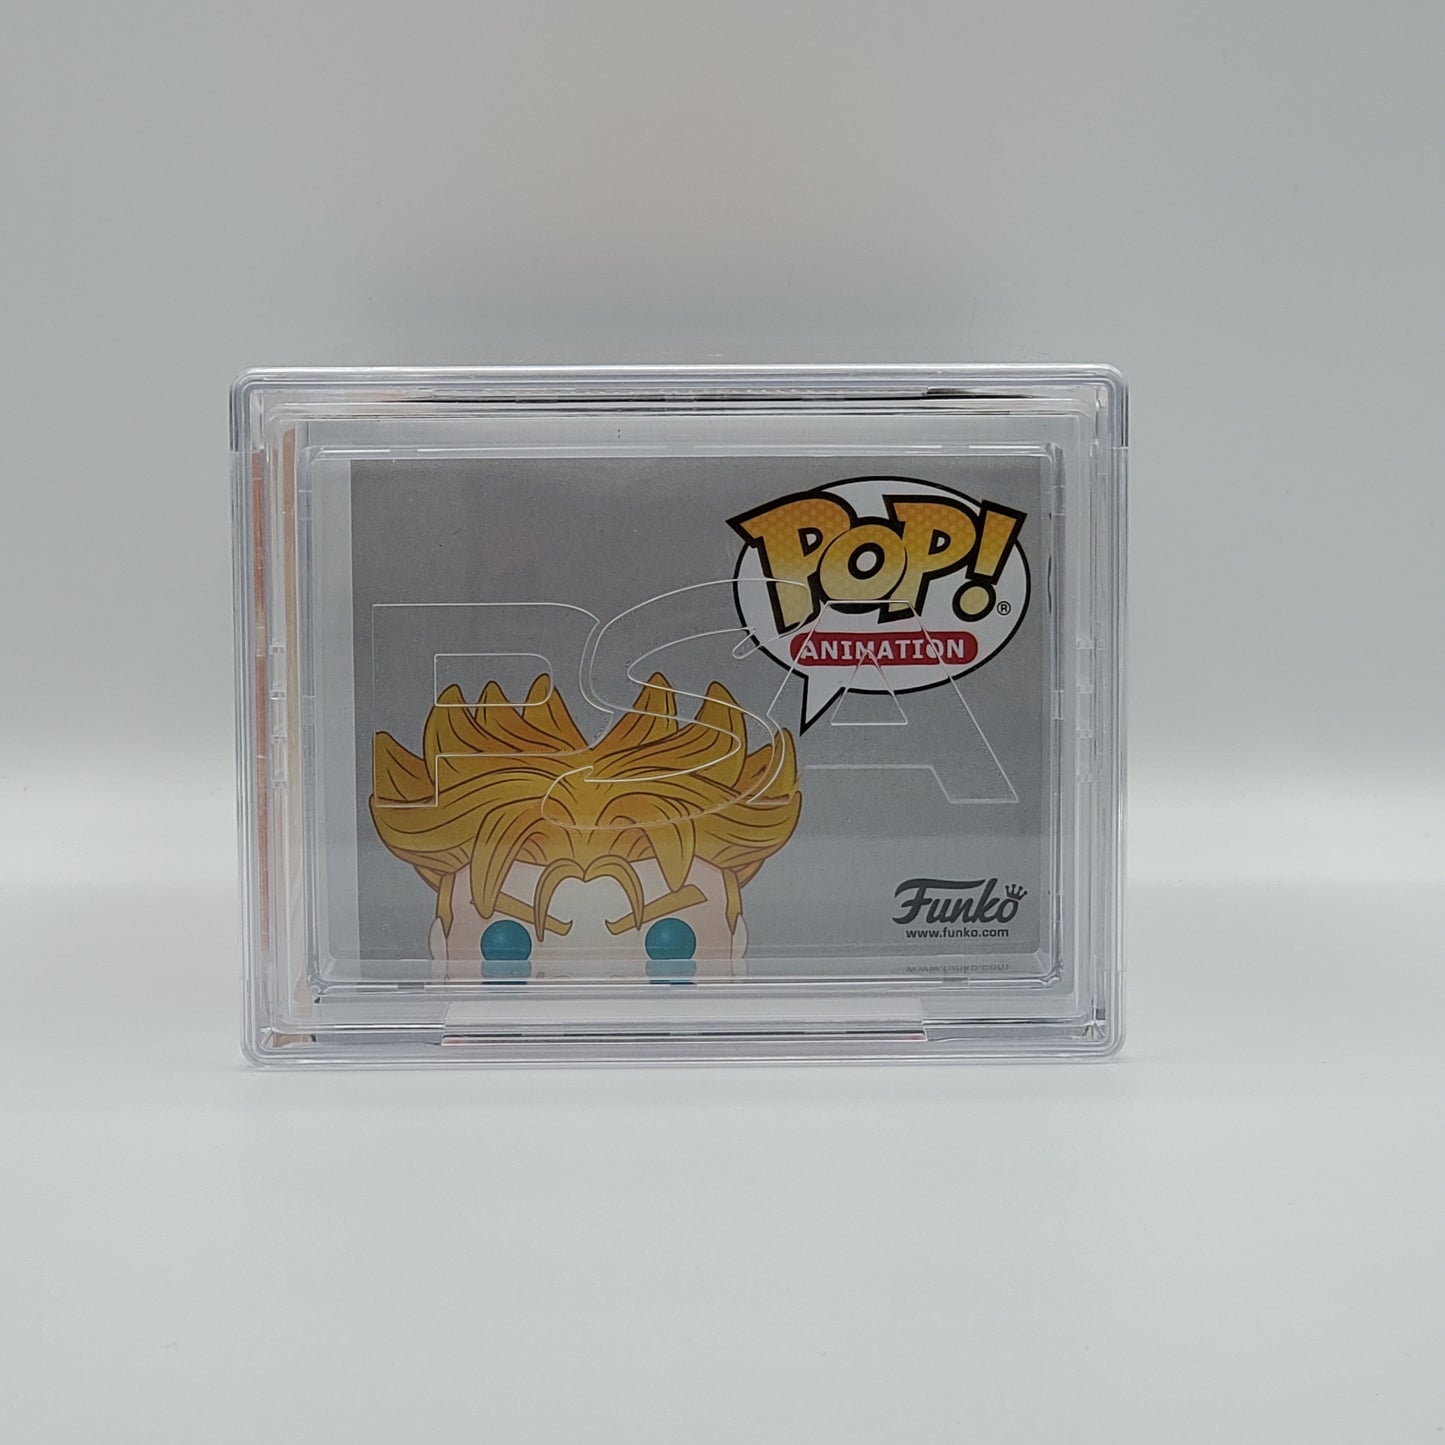 PSA ENCAPSULATED & SIGNATURE CERTIFIED - SUPER SAIYAN FUTURE TRUNKS (HOT TOPIC EXCLUSIVE) (SIGNED BY ERIC VALE)